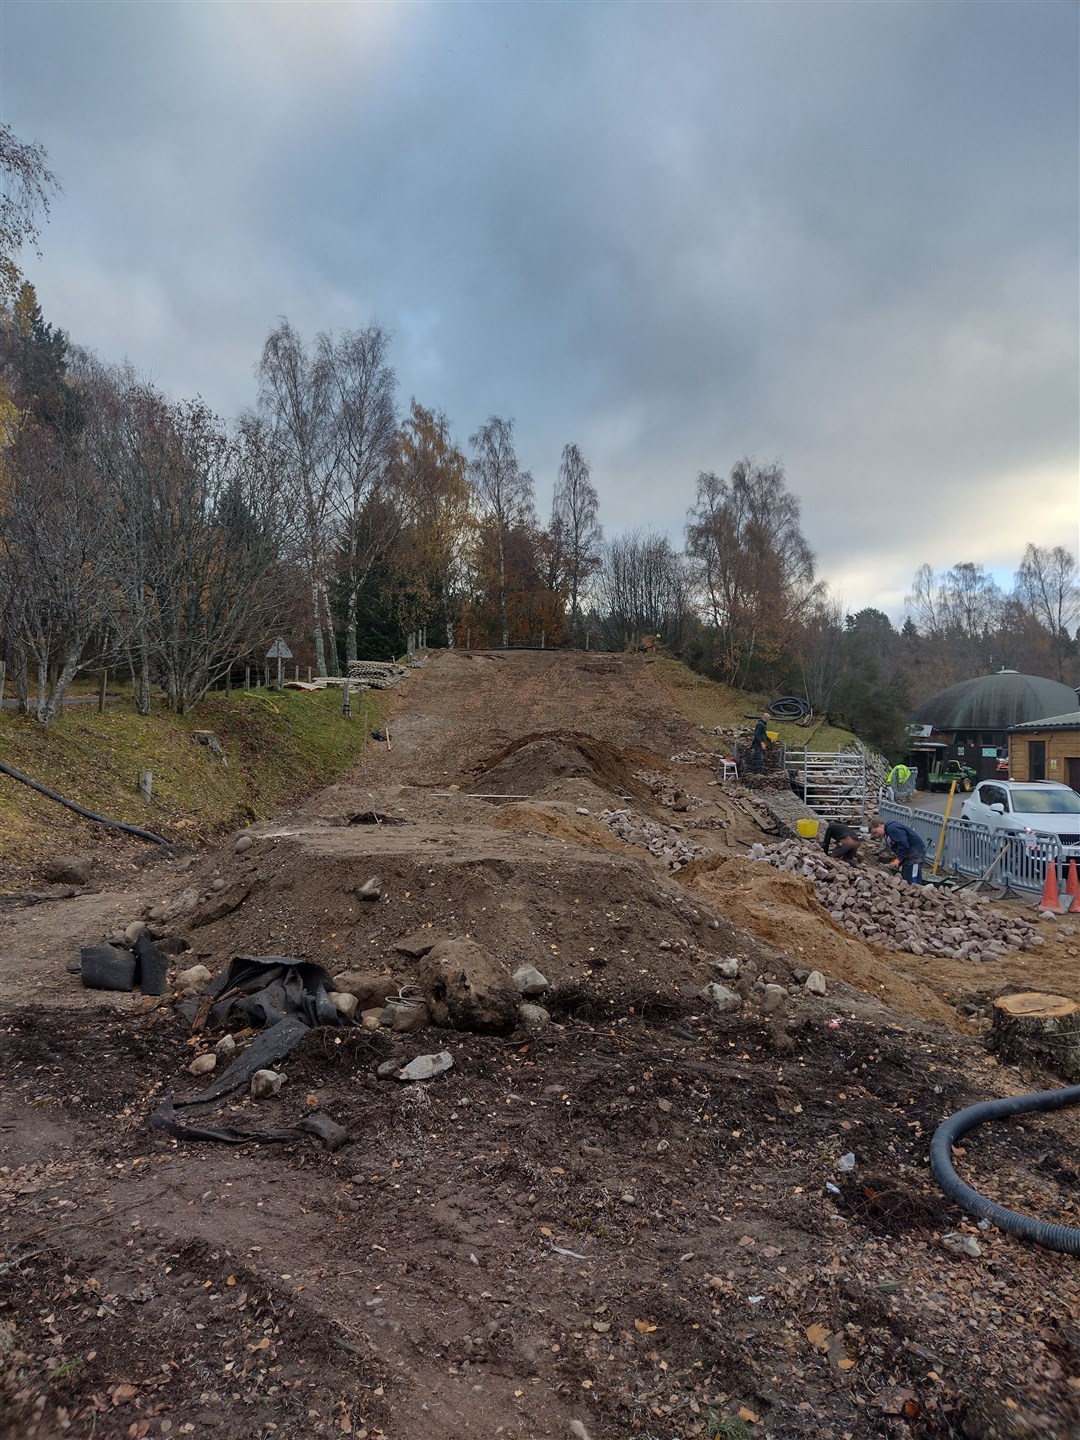 Work taking place to create a state-of-the-art artificial ski slope at Loch Insh.